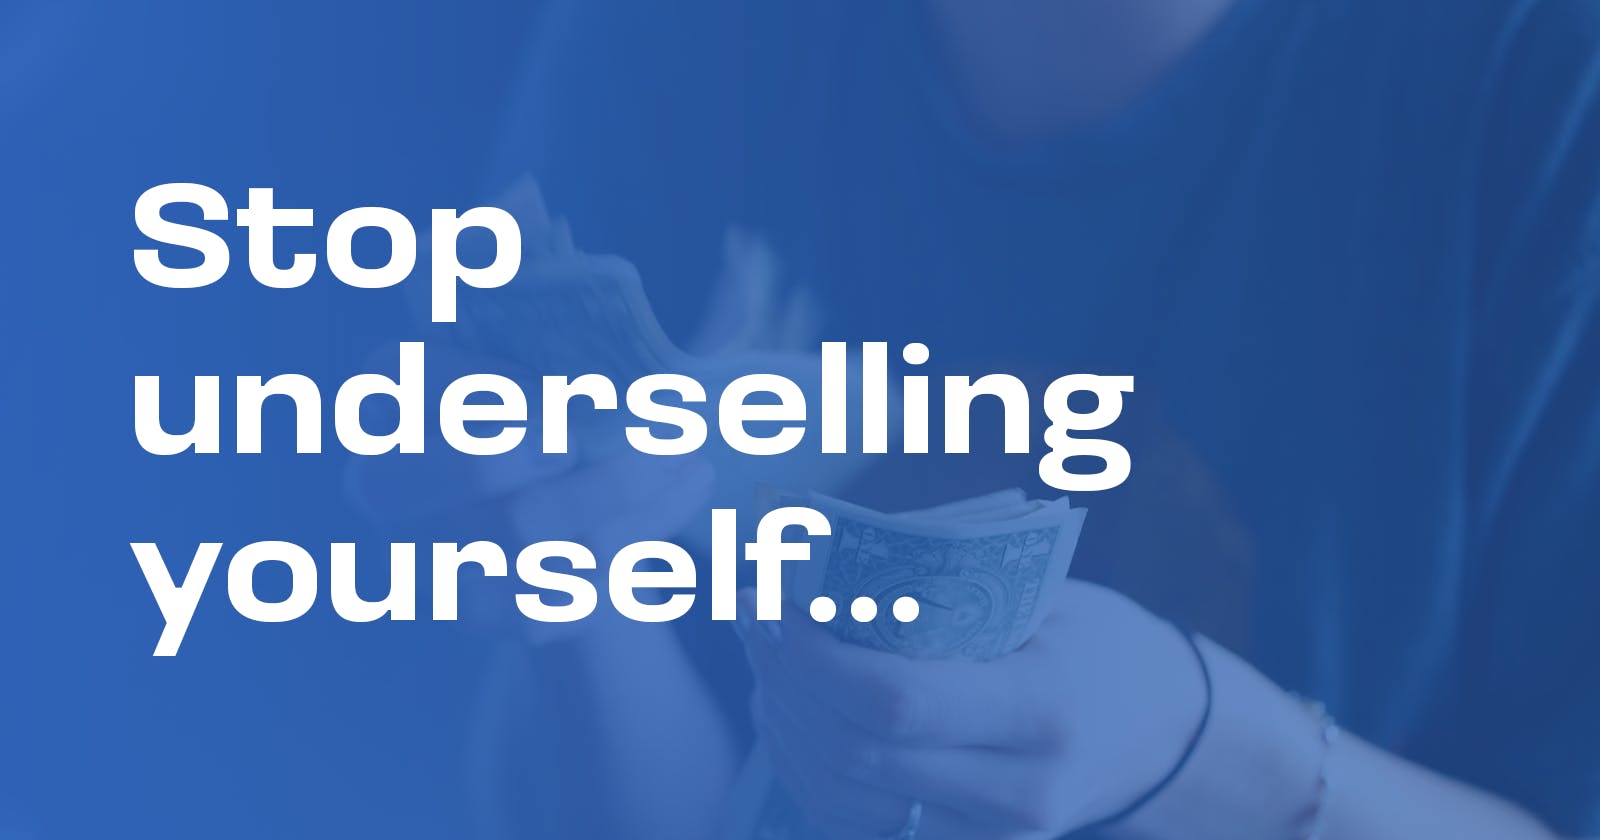 Stop underselling yourself...